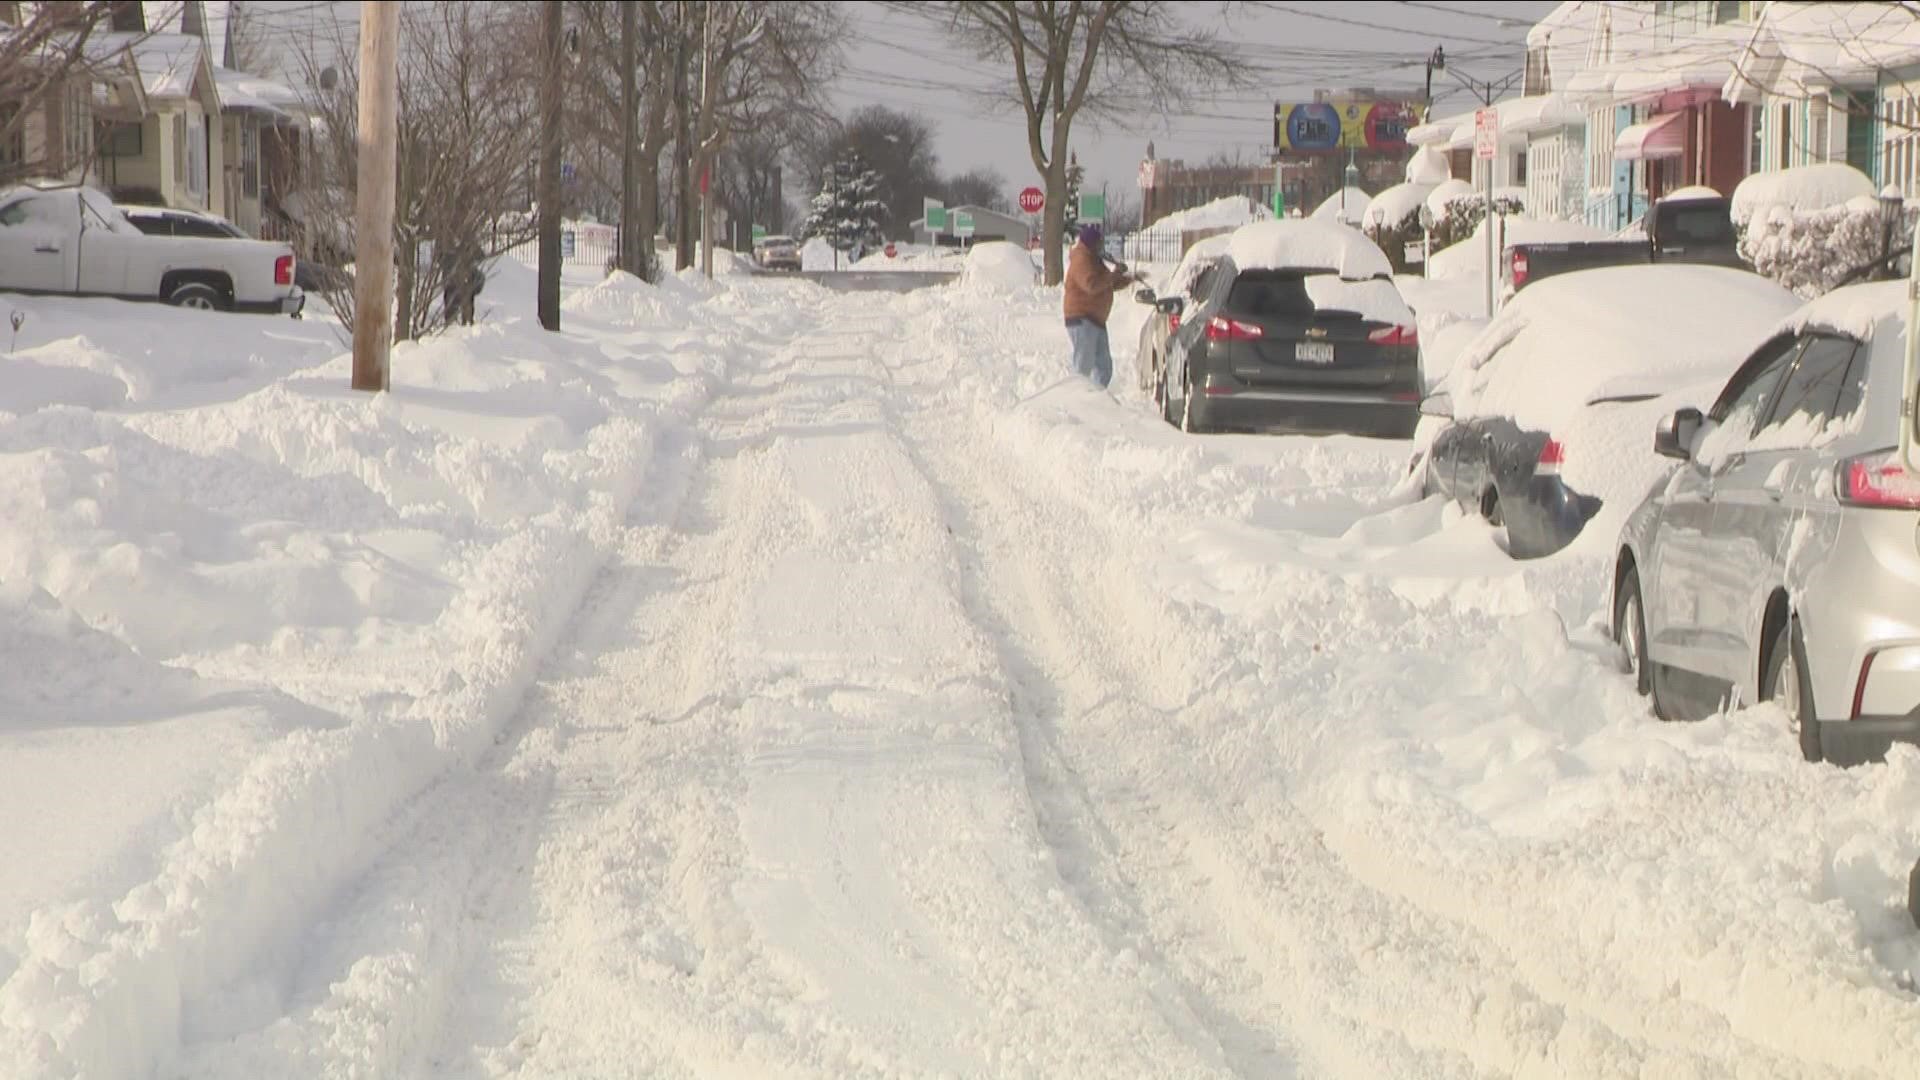 City of Buffalo releases snow removal plan for winter season